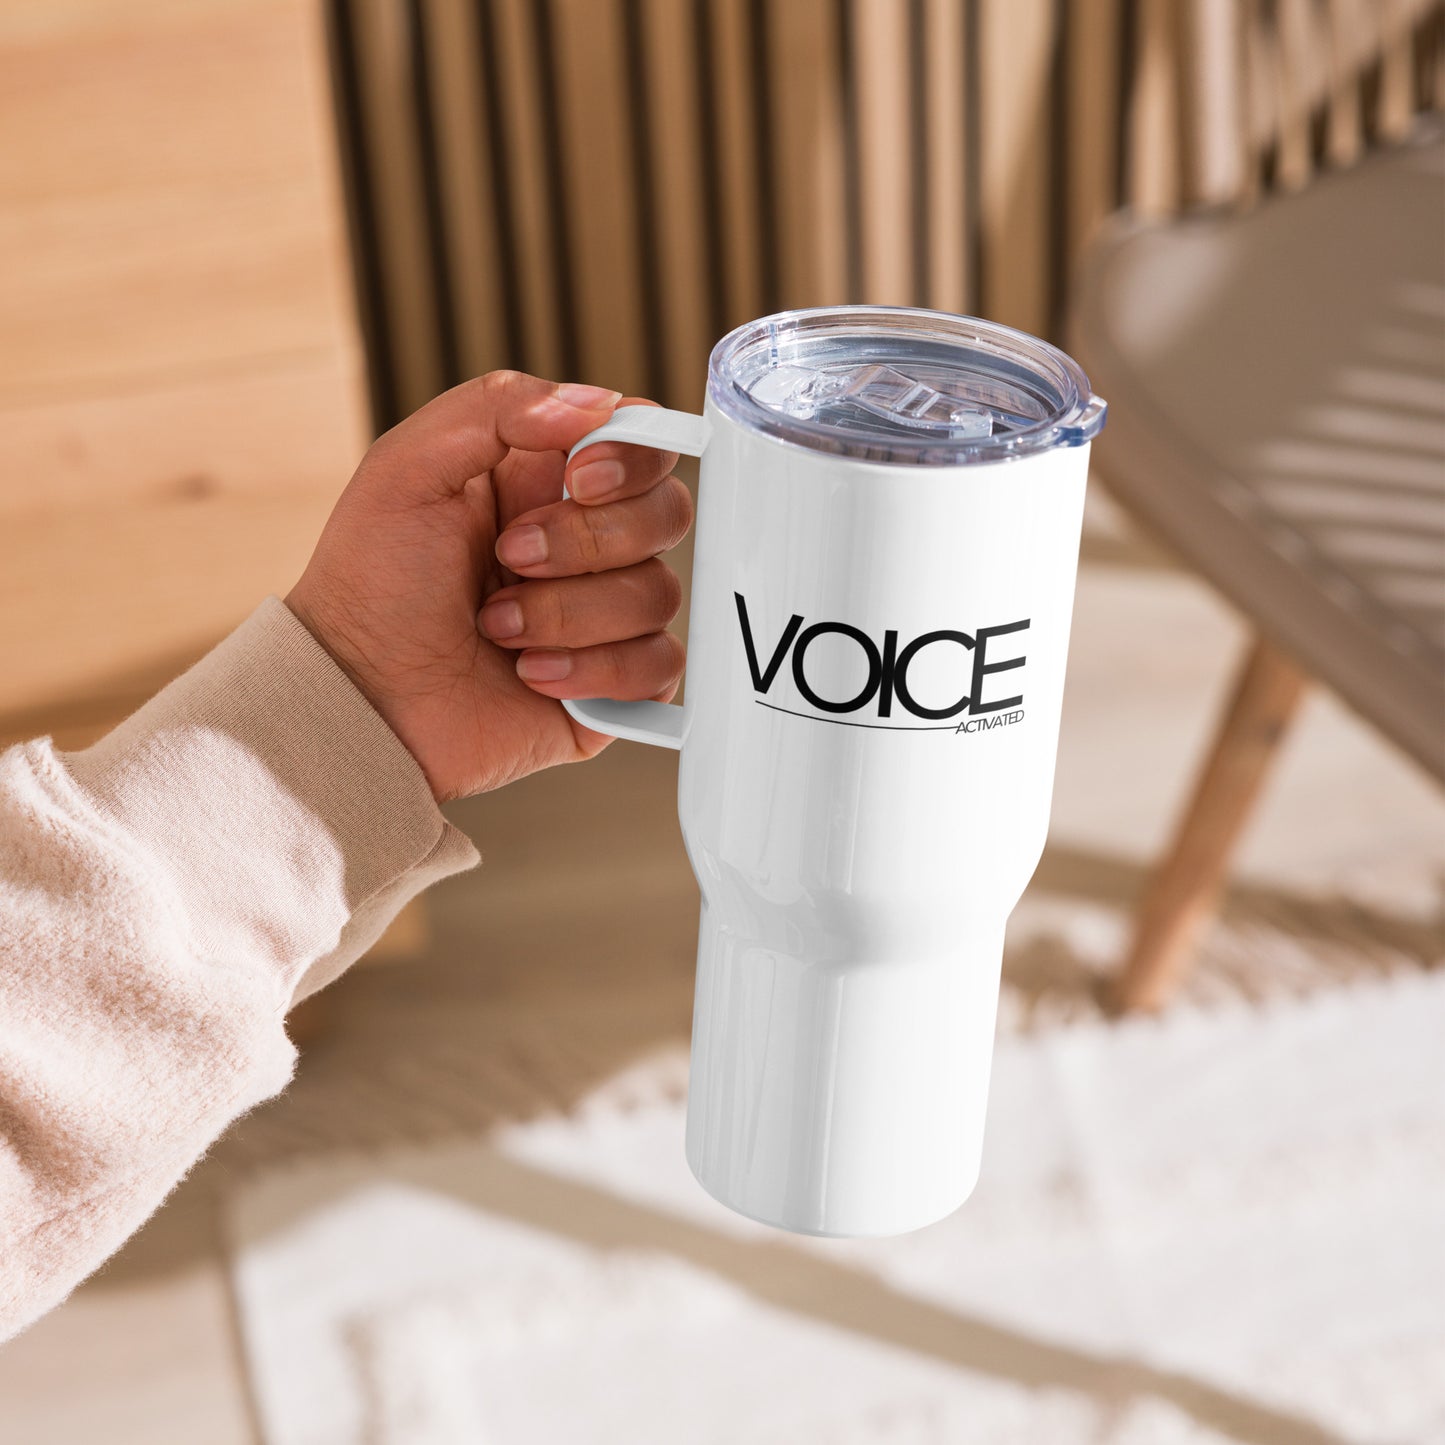 "Voice Activated" Travel mug with a handle